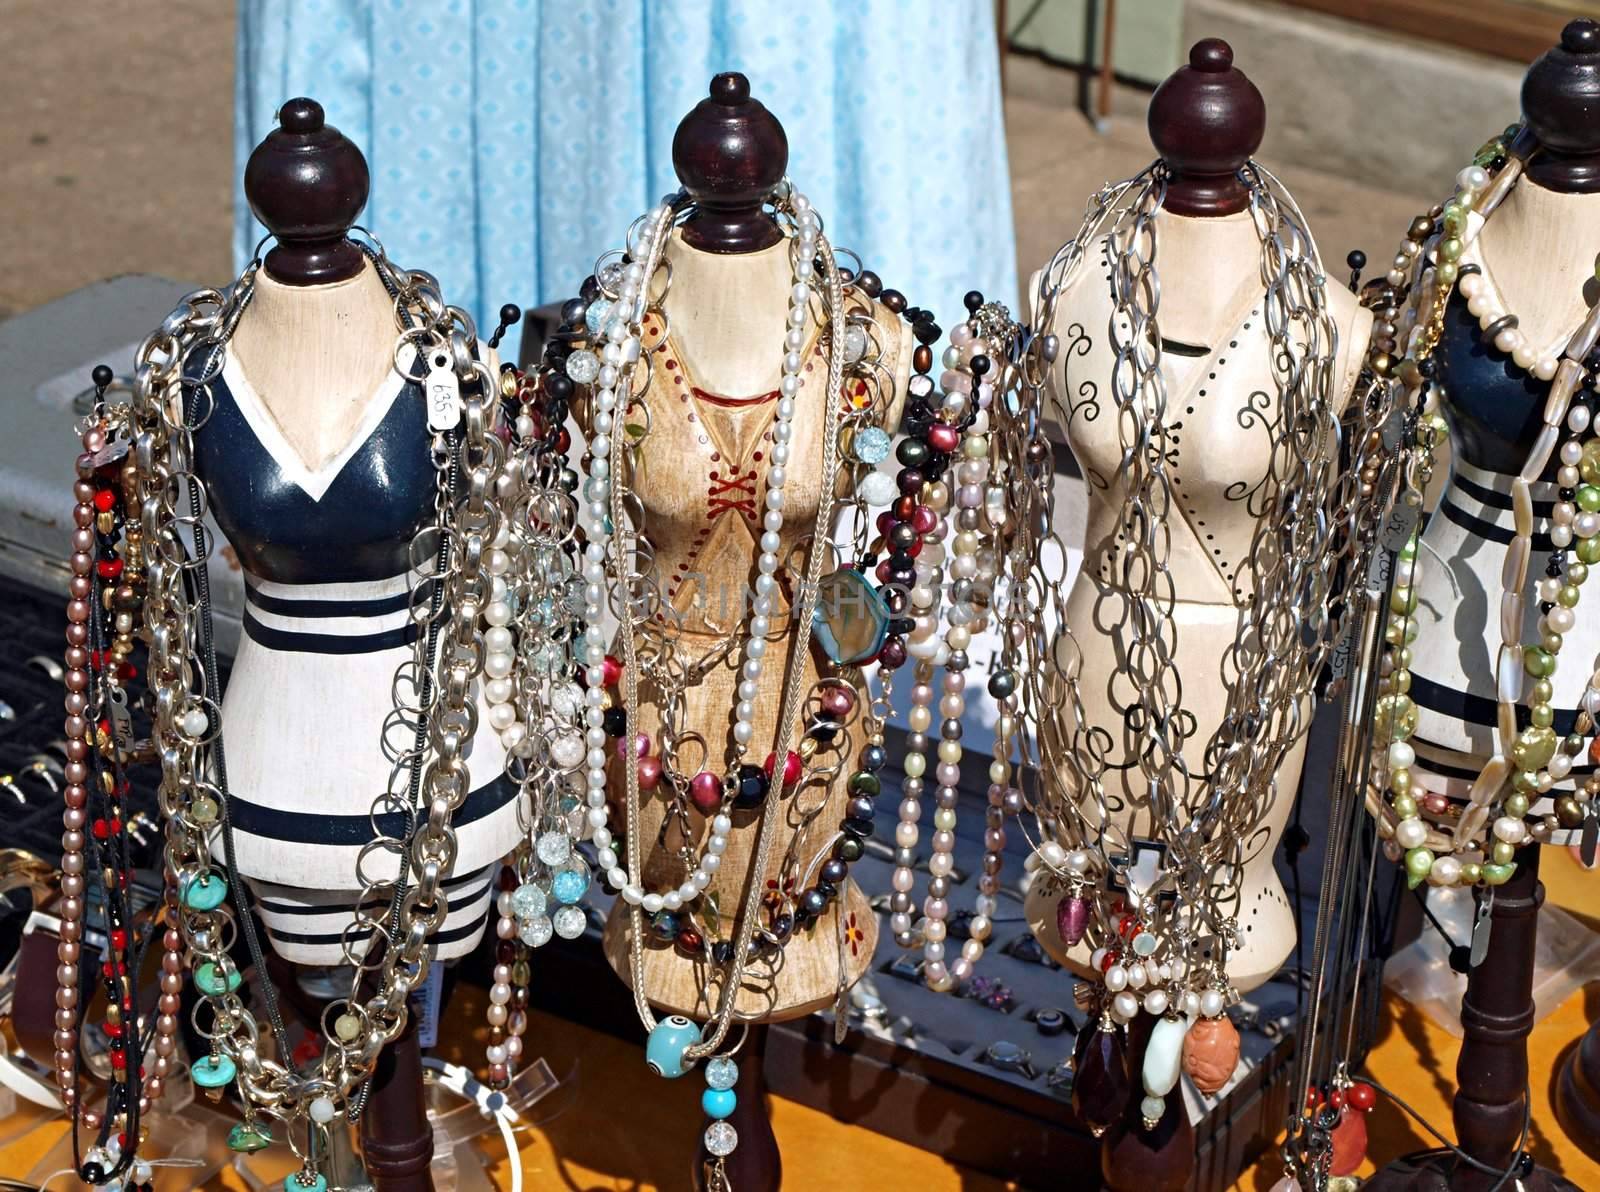 Collection of antique jewelery items on figurines in a flea market 